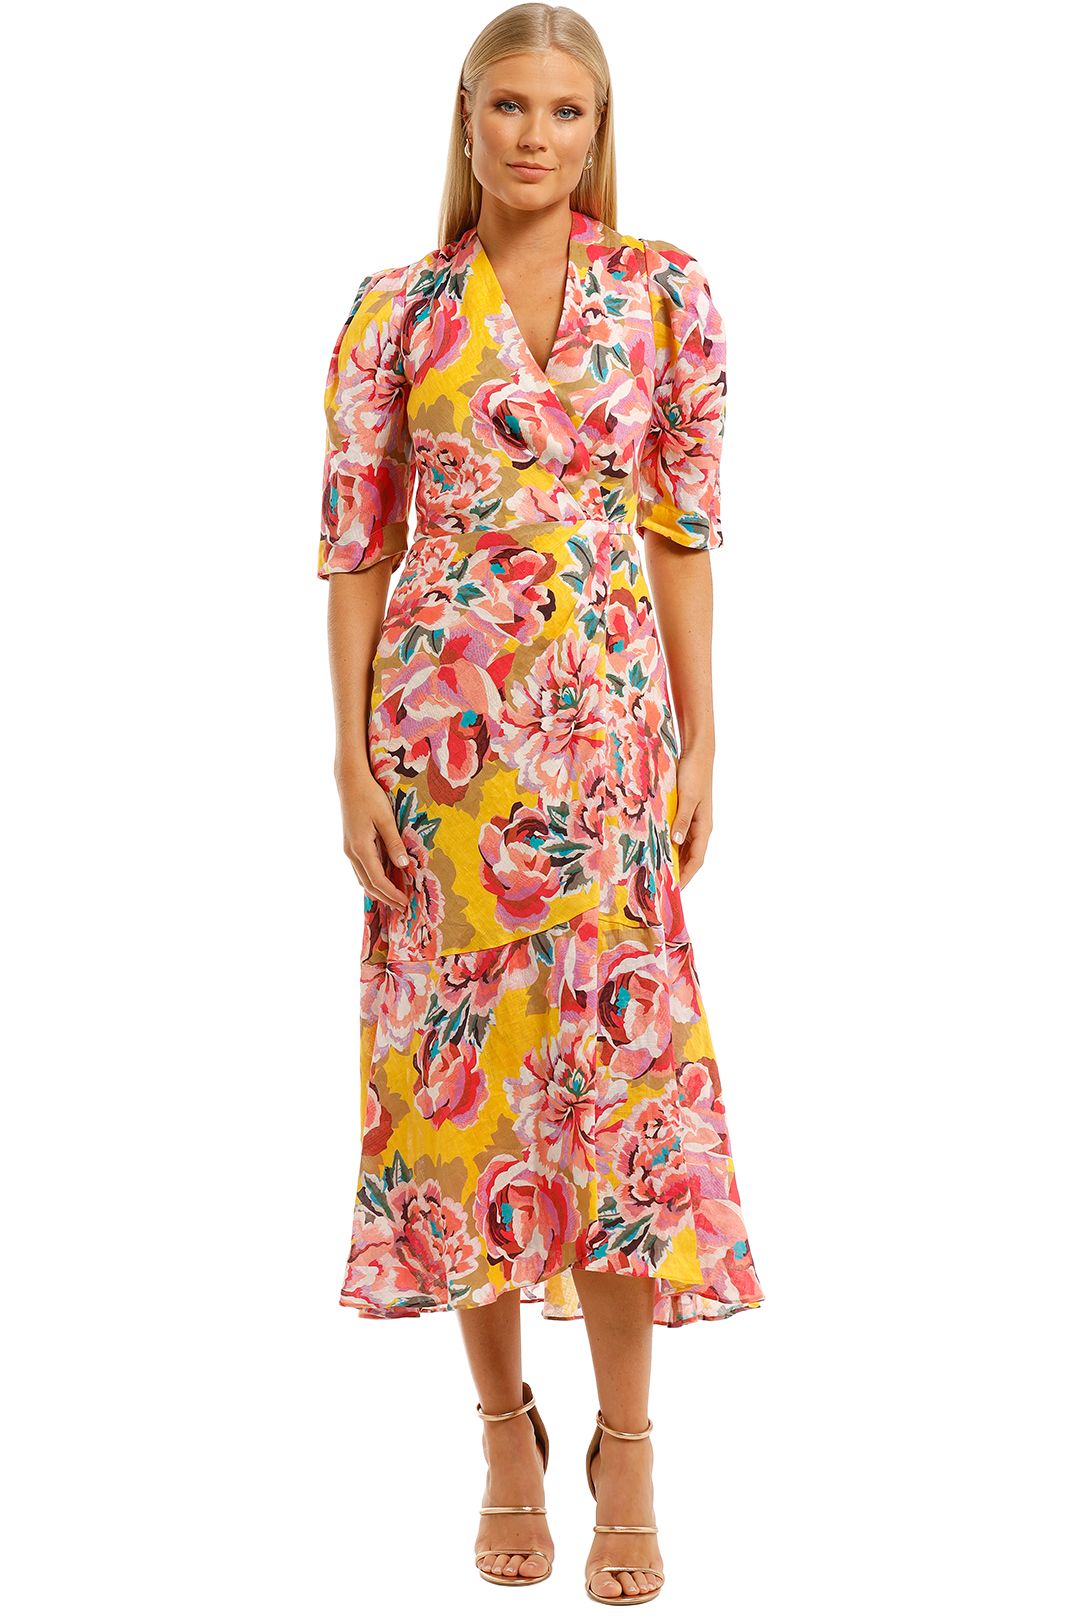 Flourish Wrap Dress in Yellow by Ginger & Smart for Rent | GlamCorner